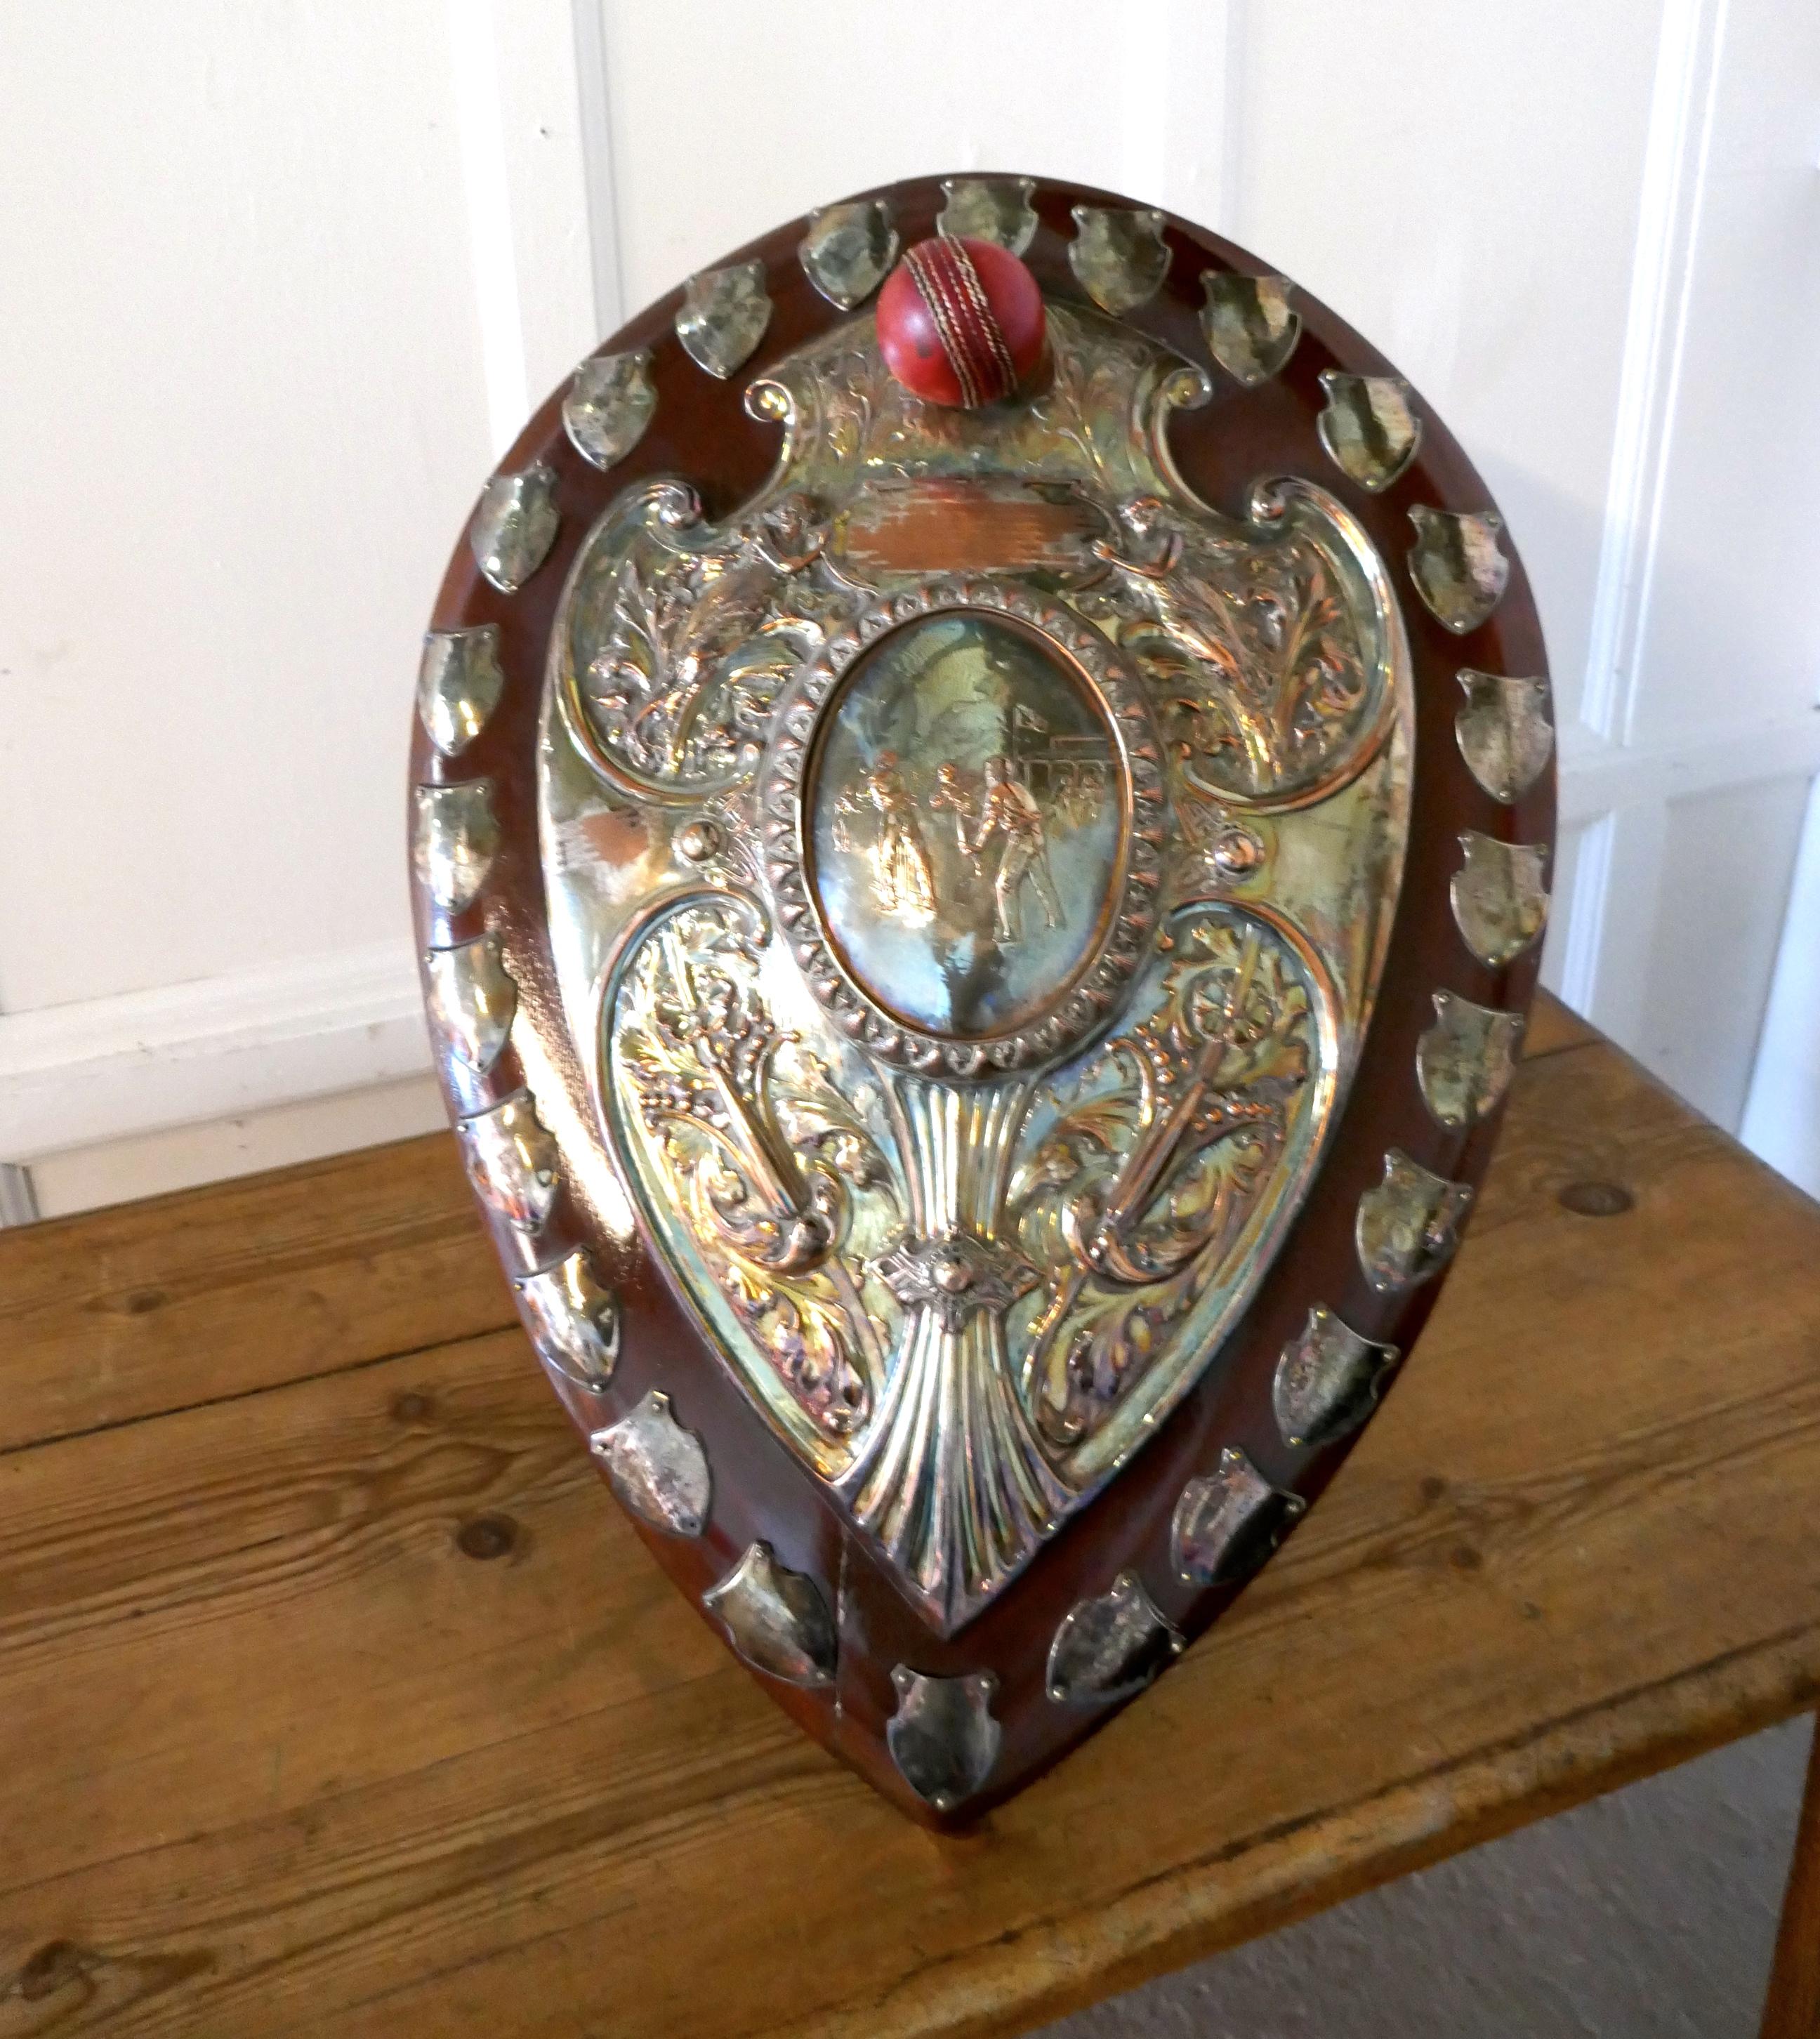 1901 Art Nouveau Sheffield Plate Cricket Trophy Shield, by Walker Hall and Sons

This is a fantastic piece, a work of art, the Oak shield has an embossed Sheffield Silver plate, in the centre of this a scene from a cricket match and around this Art